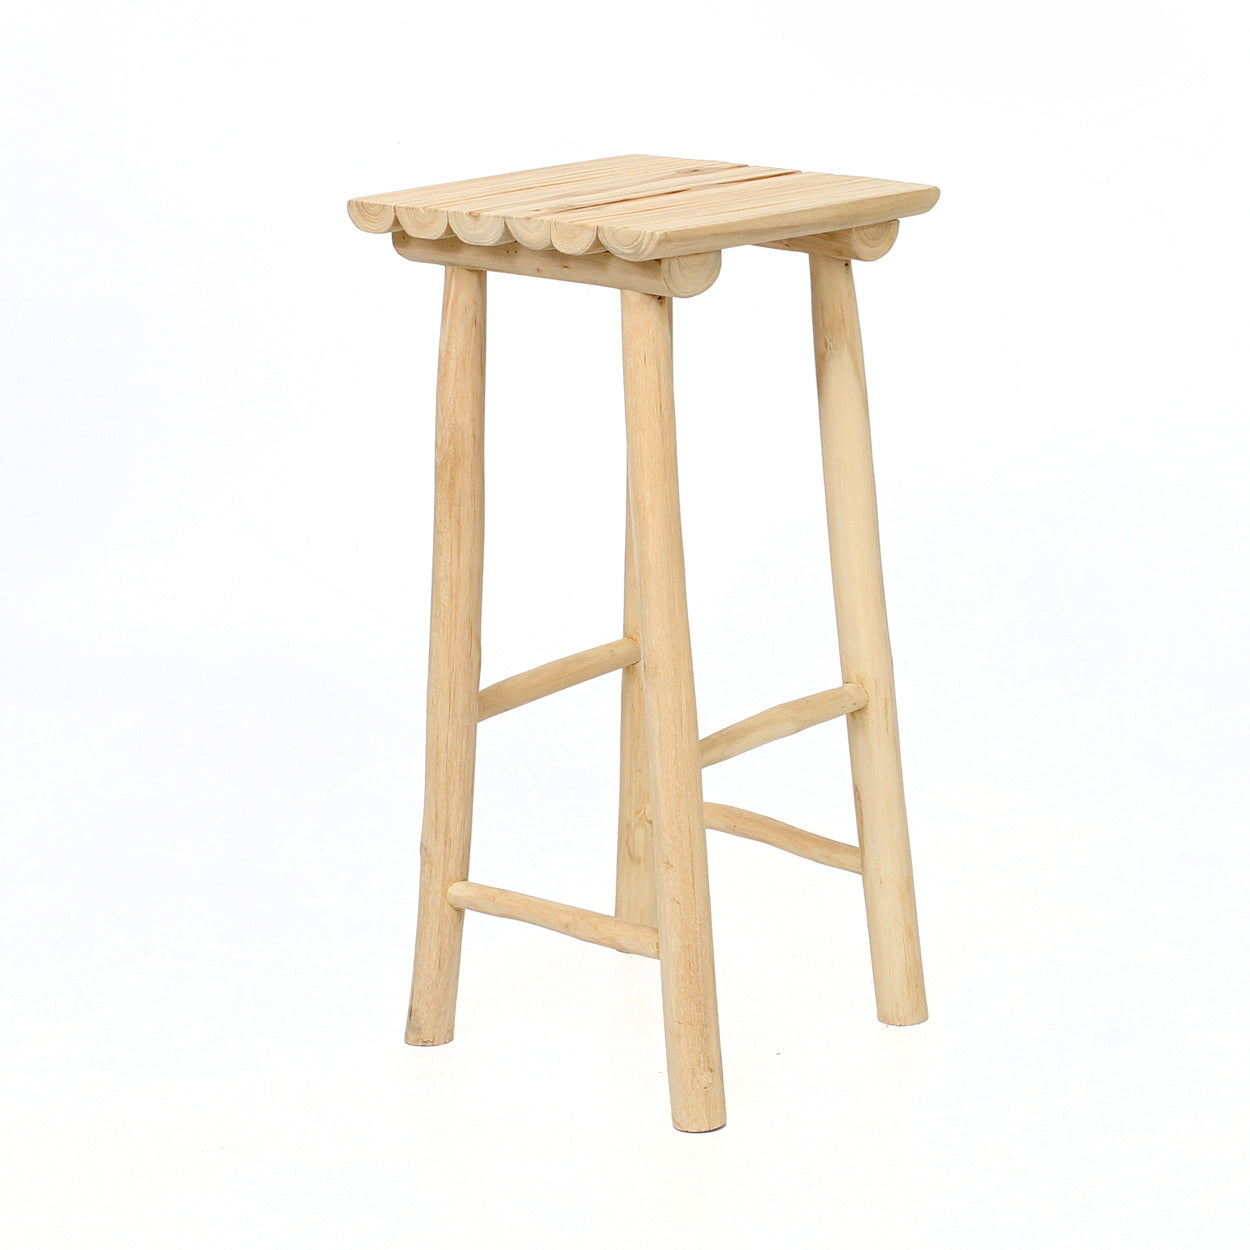 THE ISLAND Bar Stool half-front view